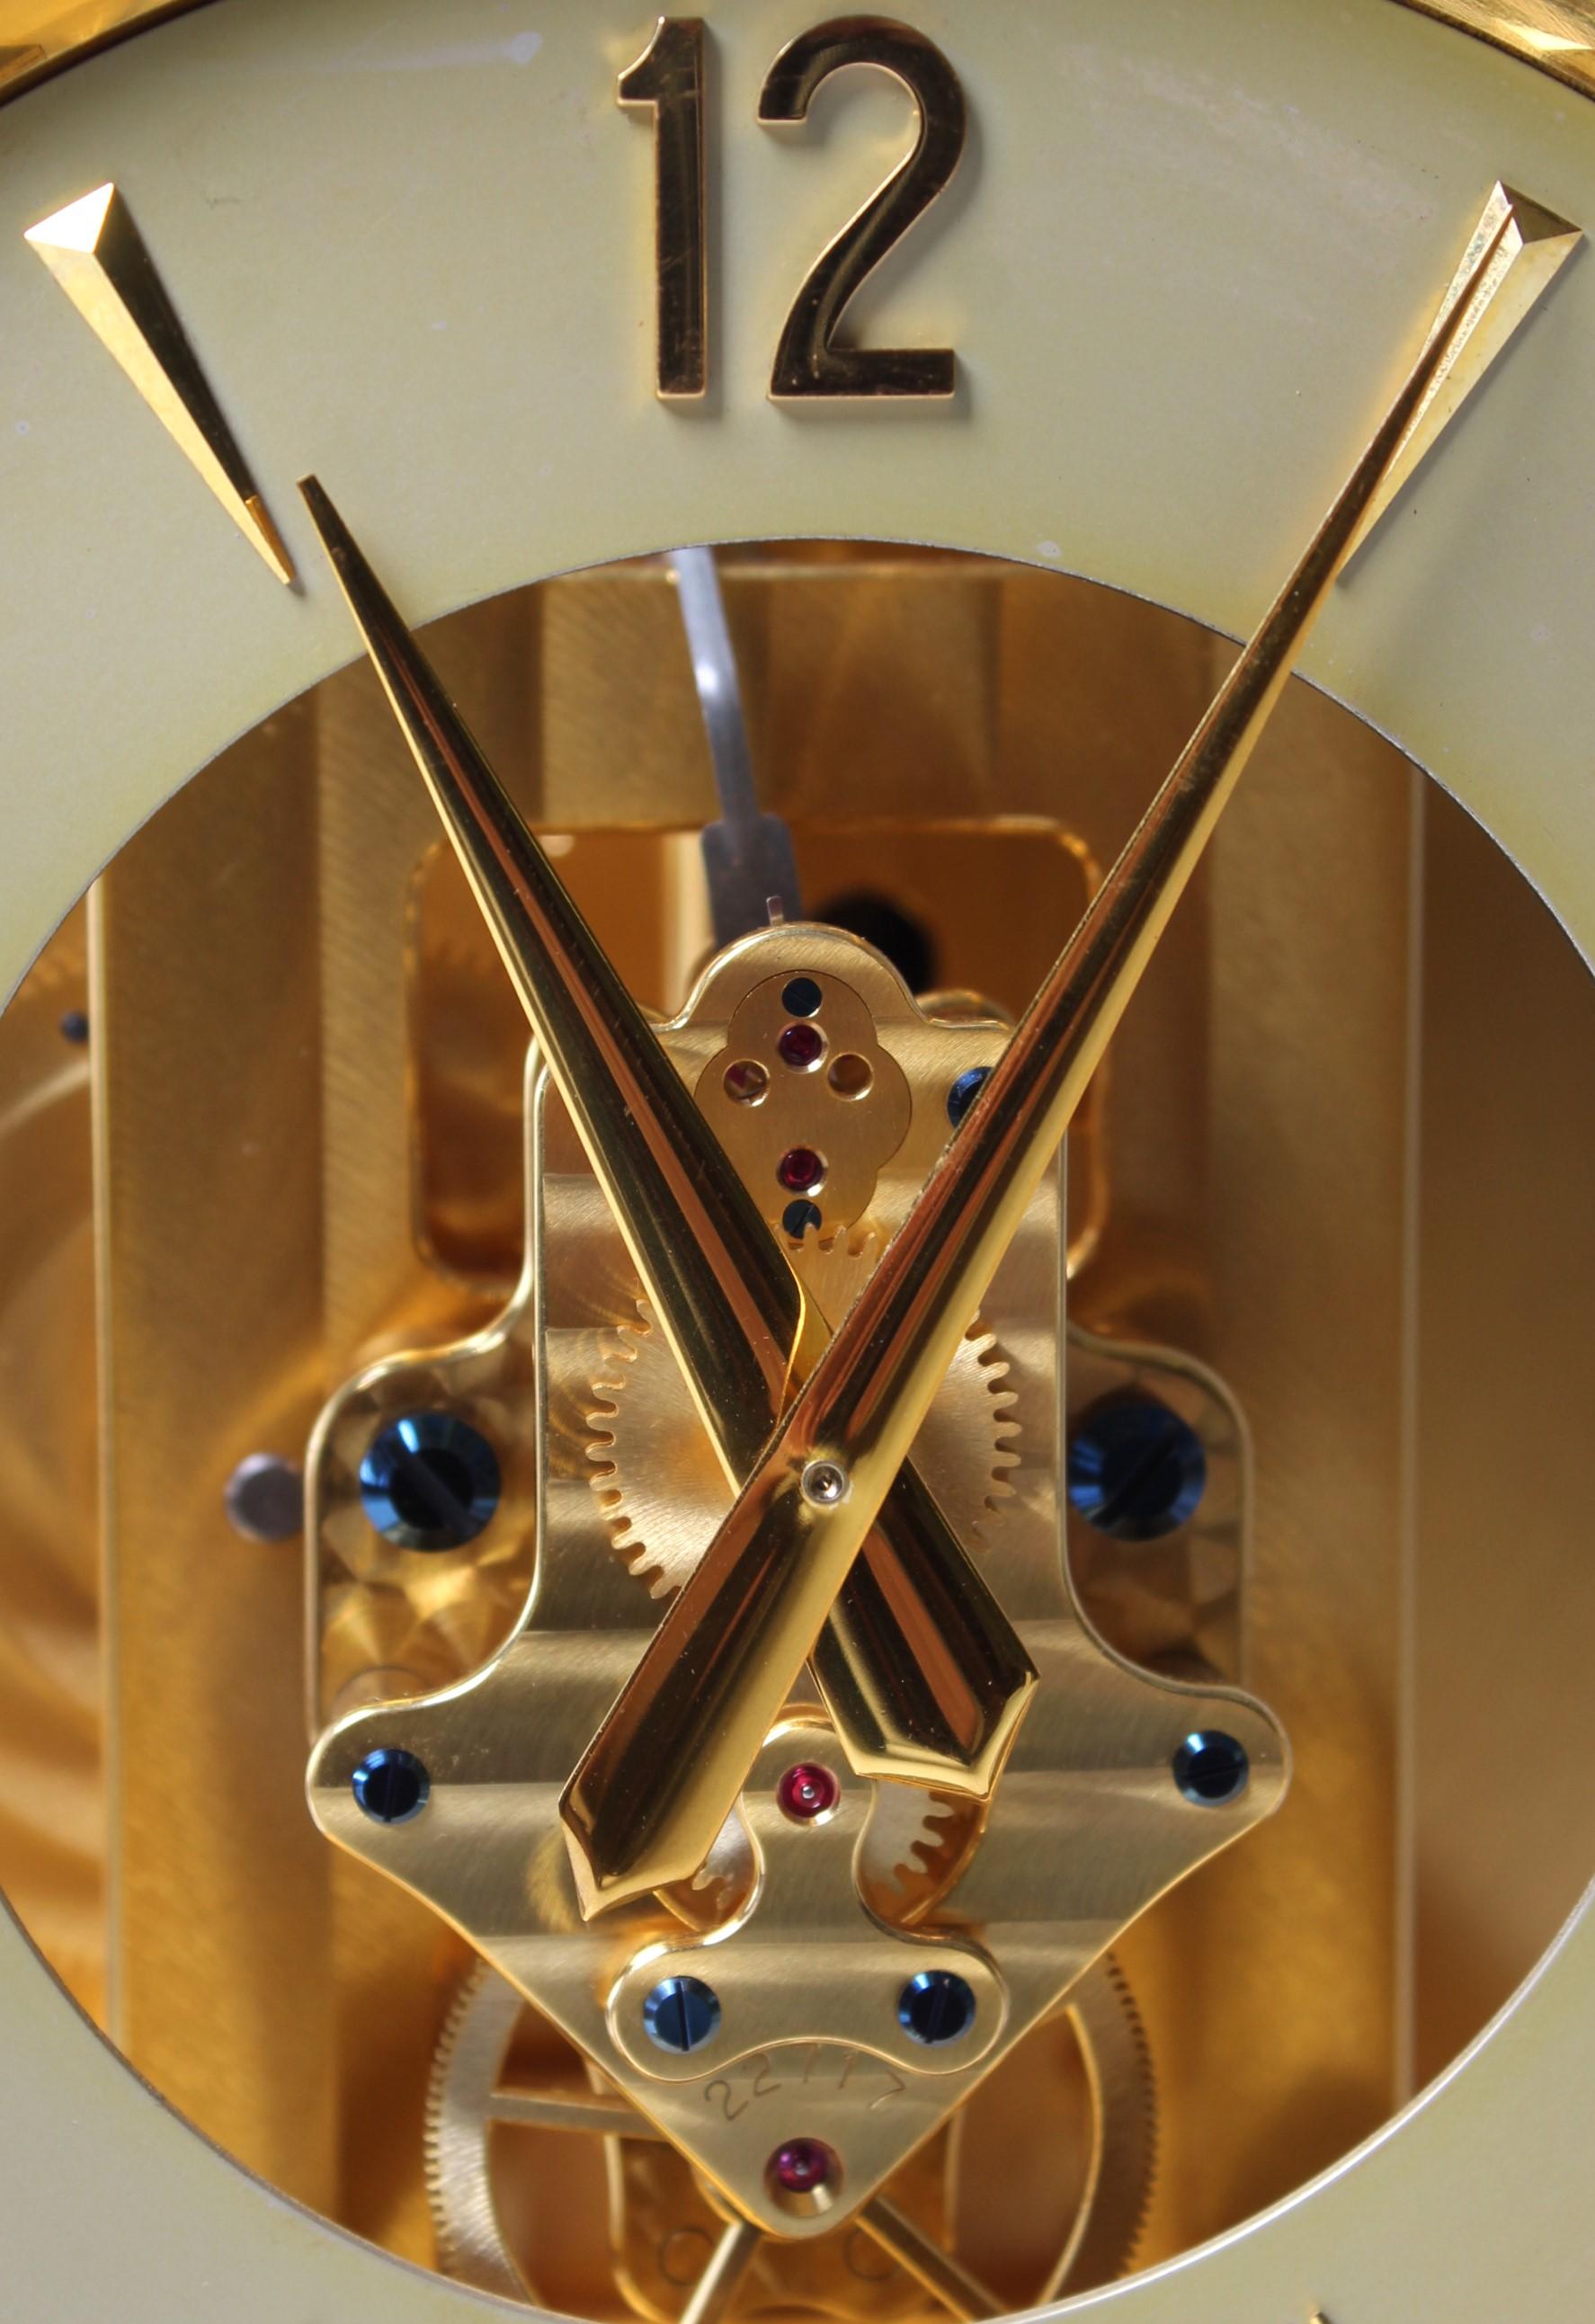 Brass Atmos Clock by Jaeger LeCoultre, Classique Design, Manufactured in 1950 For Sale